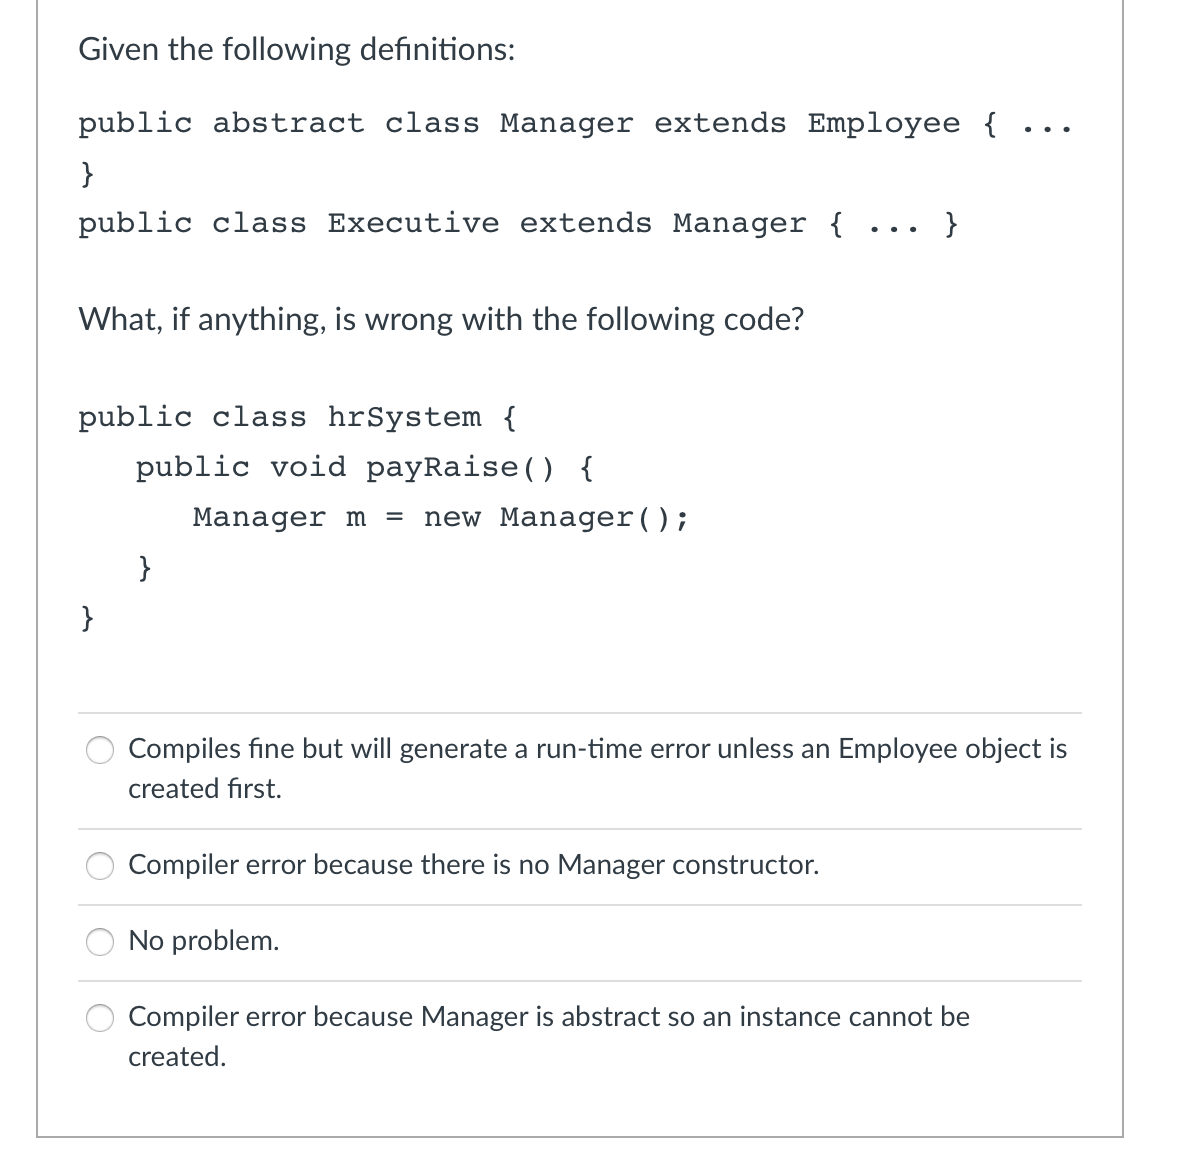 Given the following definitions:
public abstract class Manager extends Employee {
}
public class Executive extends Manager {
What, if anything, is wrong with the following code?
public class hrSystem {
}
public void payRaise() {
}
Manager m = new Manager();
Compiler error because there is no Manager constructor.
}
Compiles fine but will generate a run-time error unless an Employee object is
created first.
No problem.
...
Compiler error because Manager is abstract so an instance cannot be
created.